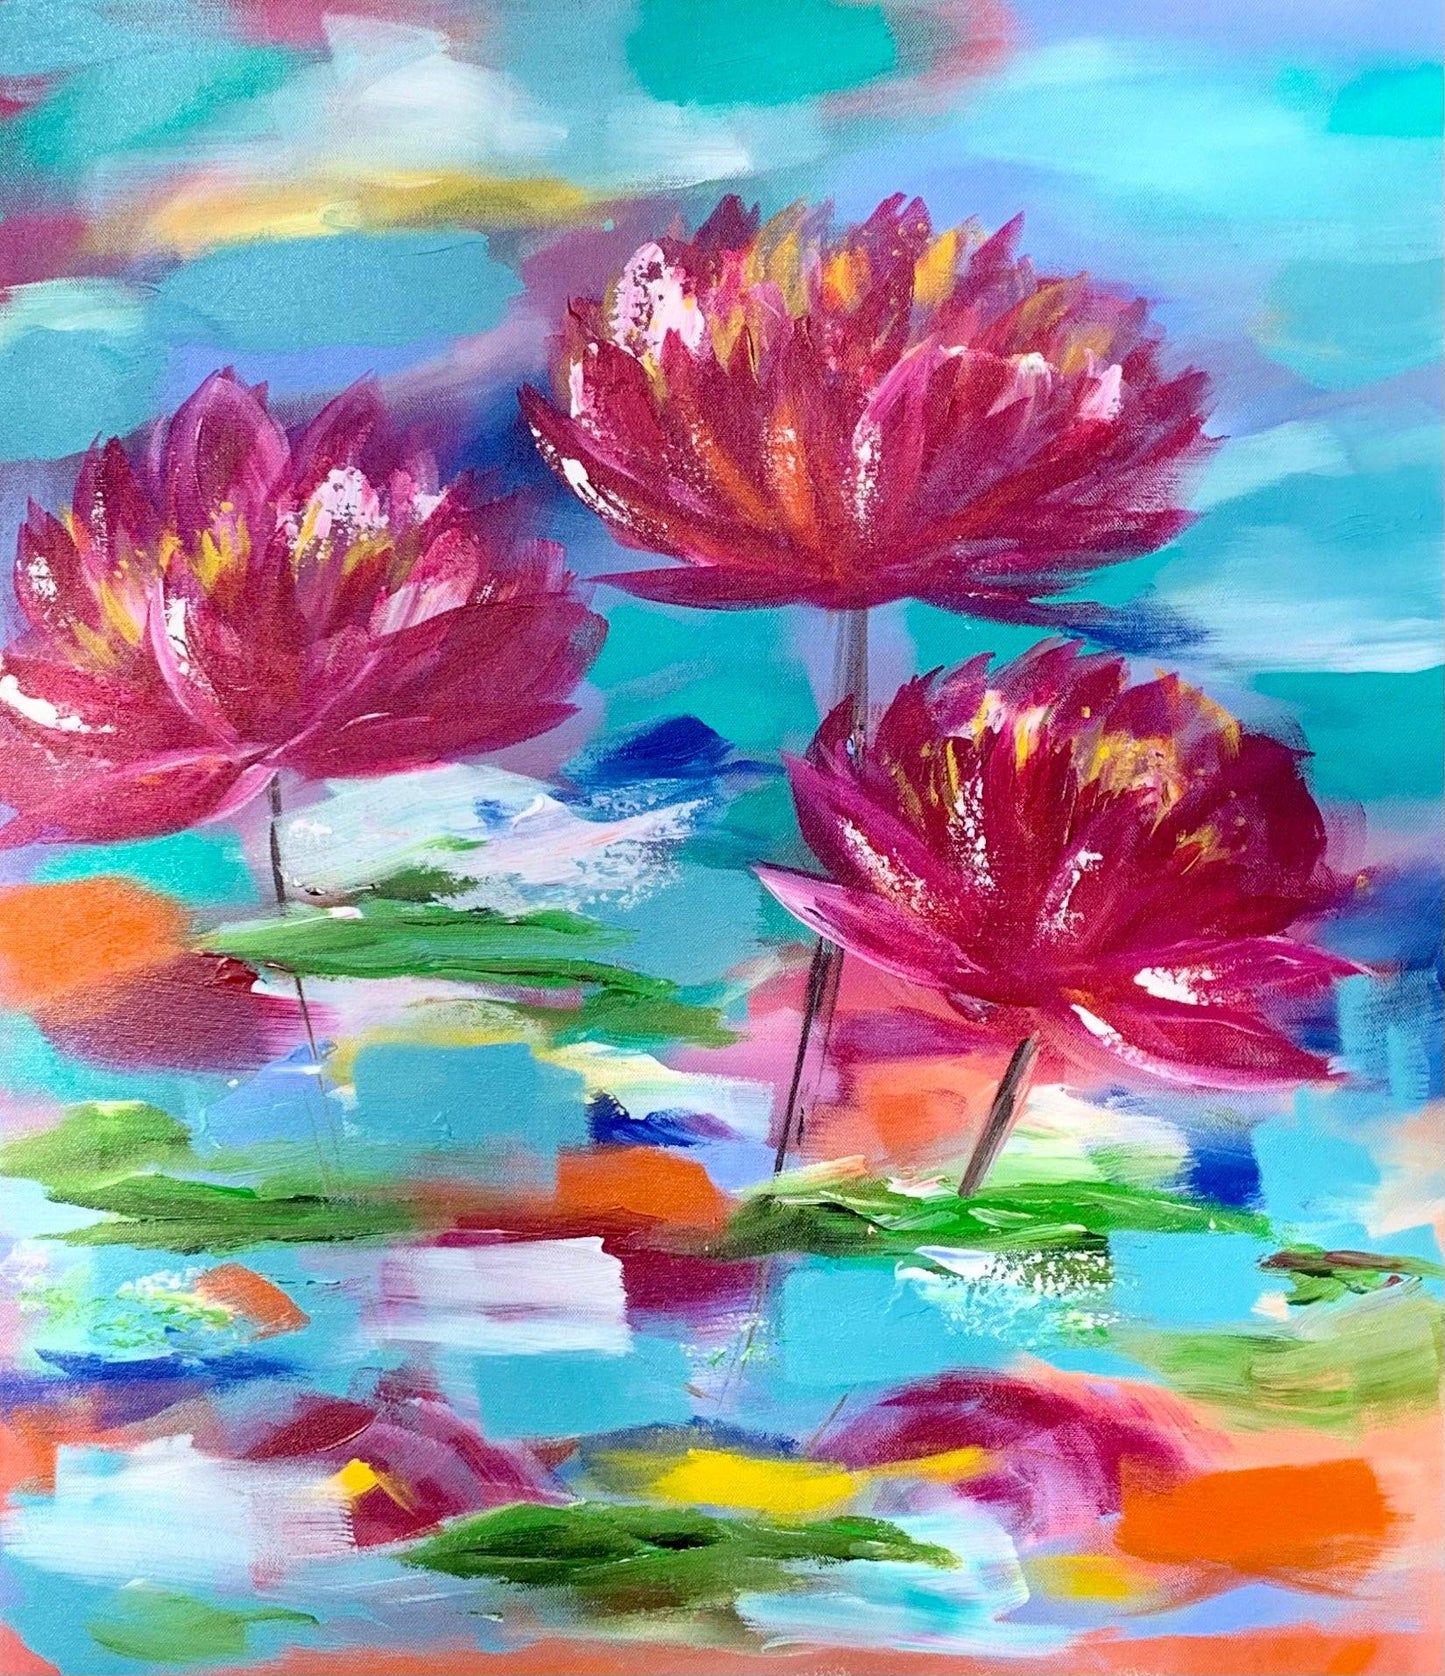 Lilly Pads - 2 piece Artwork  - 60x60 - Full Resin finish - Available by commission